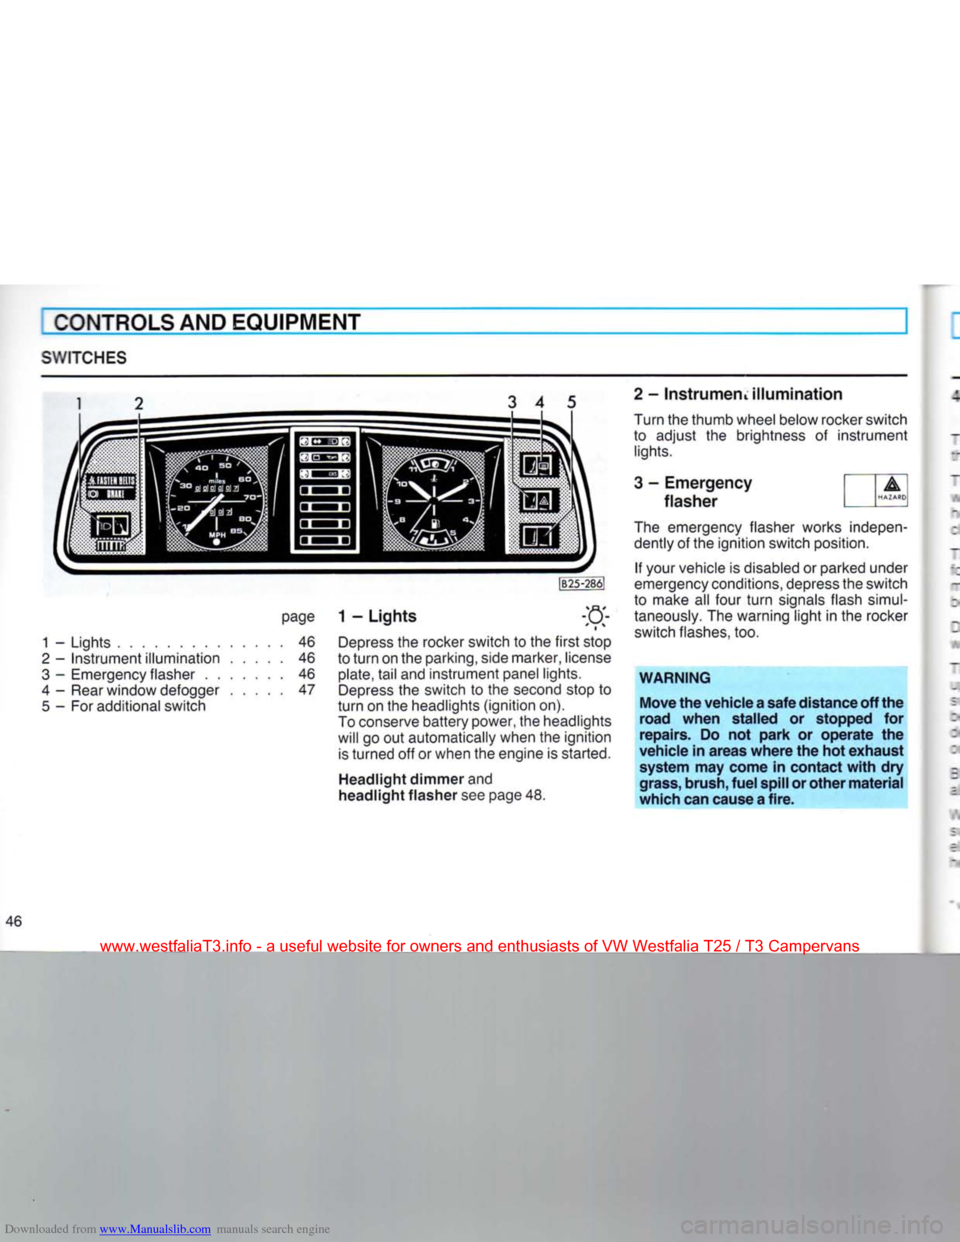 VOLKSWAGEN TRANSPORTER 1990 T4 / 4.G Owners Manual Downloaded from www.Manualslib.com manuals search engine 
CONTROLS AND EQUIPMENT 

SWITCHES 
3 4 5 

page
 1 - Lights 

1
 -
 Lights
 46 

2
 -
 Instrument illumination
 46 

3
 -
 Emergency flasher
 